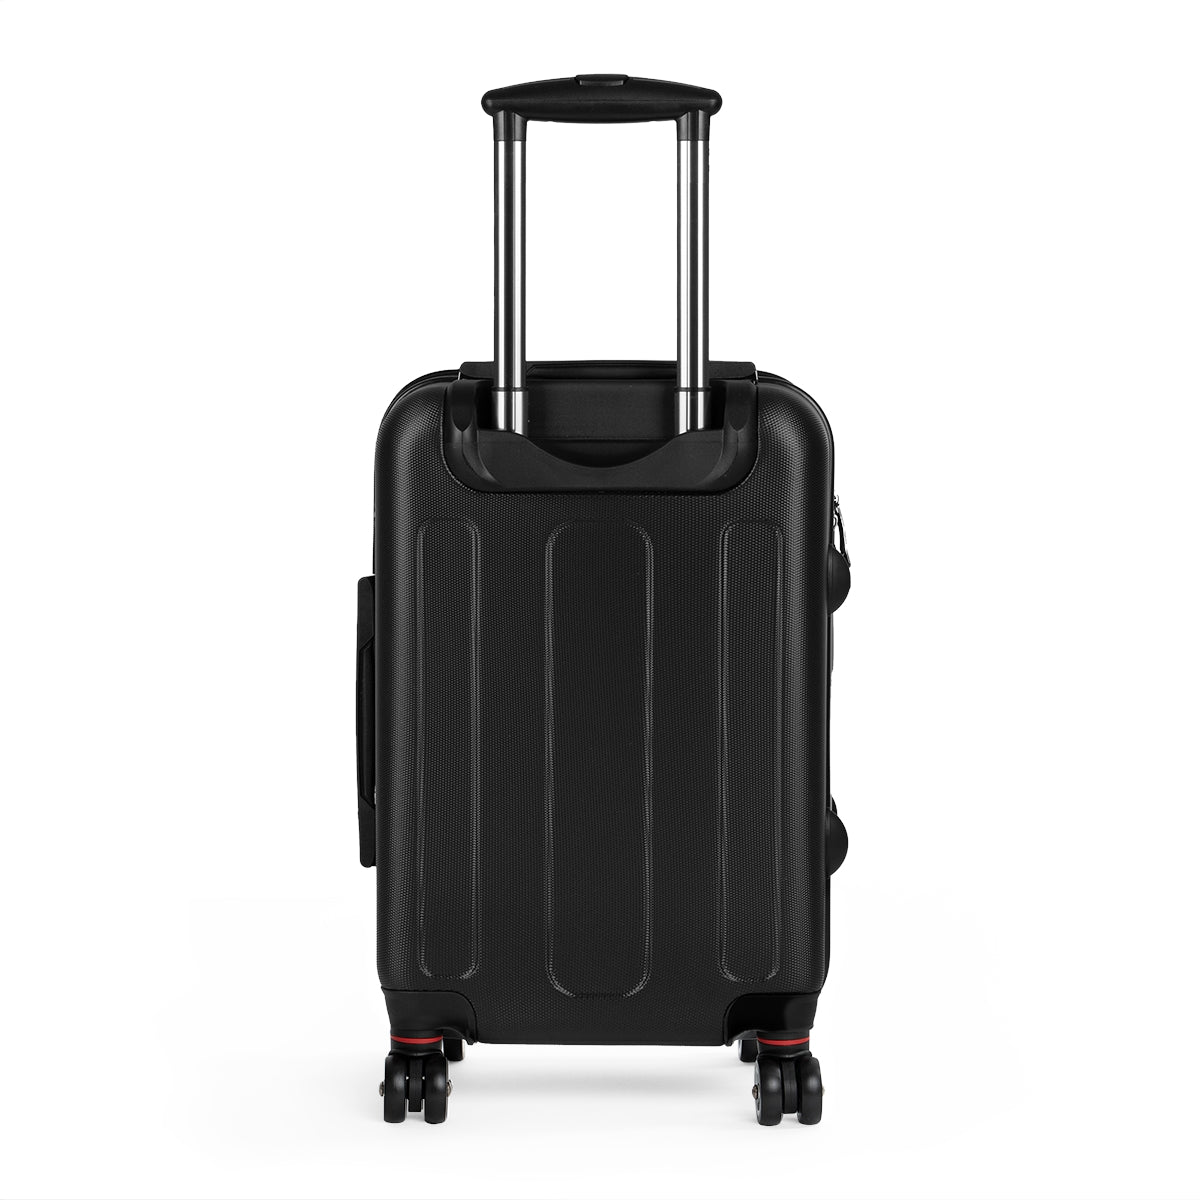 Getrott Carlos Santana Abraxas 1970 Black Cabin Suitcase Extended Storage Adjustable Telescopic Handle Double wheeled Polycarbonate Hard-shell Built-in Lock-Bags-Geotrott